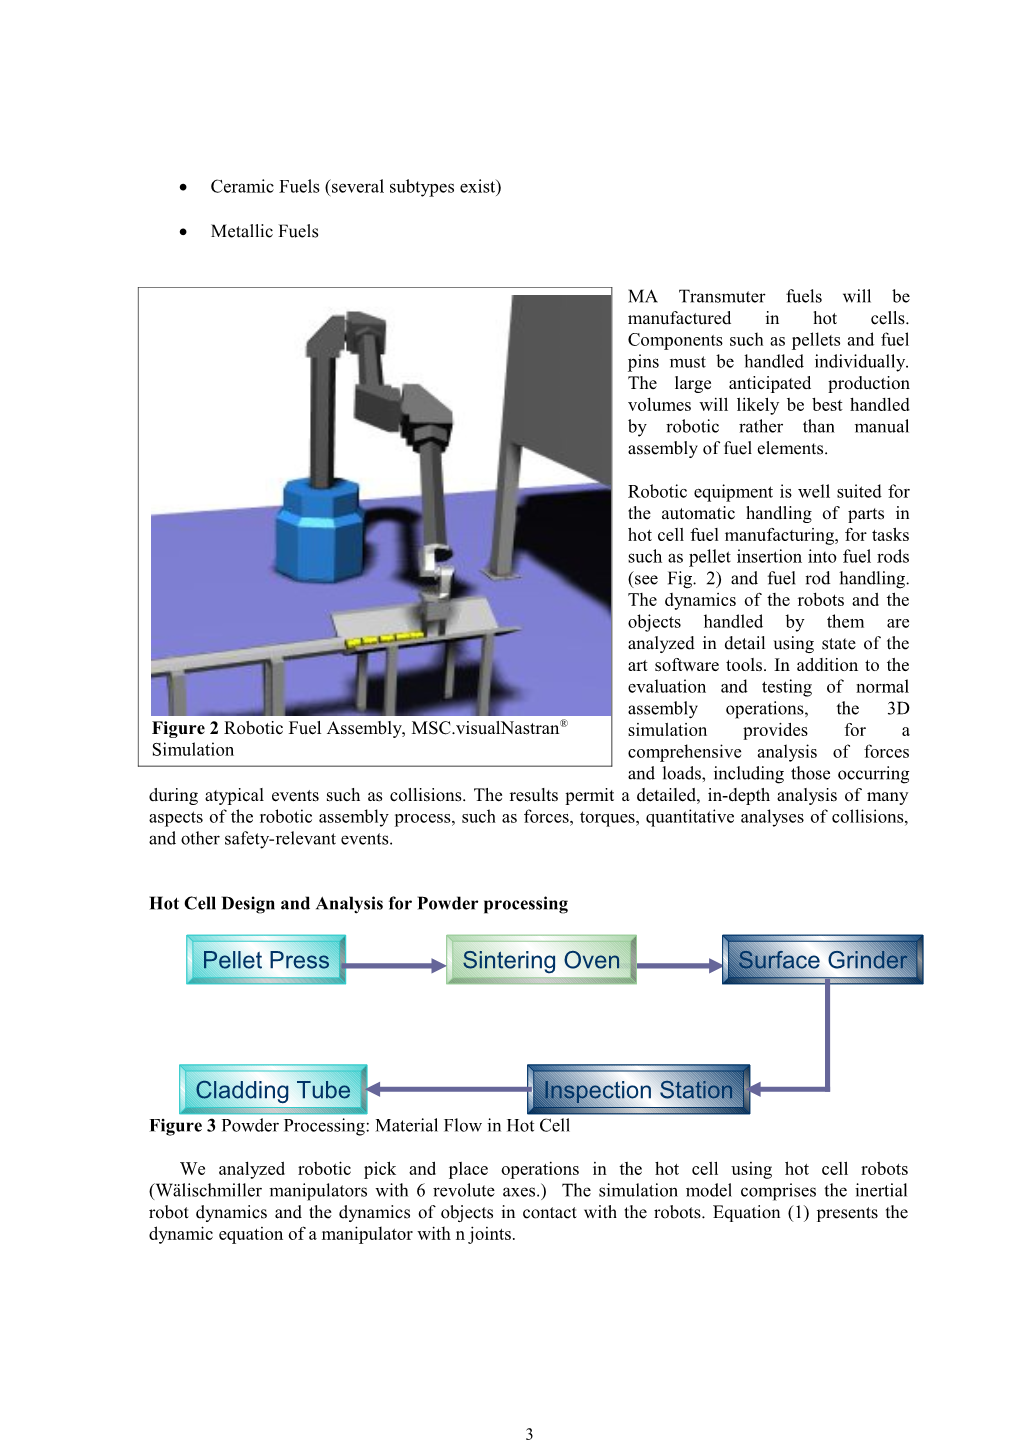 Design Concepts and Process Analysis for Transmuter Fuel Manufacturing